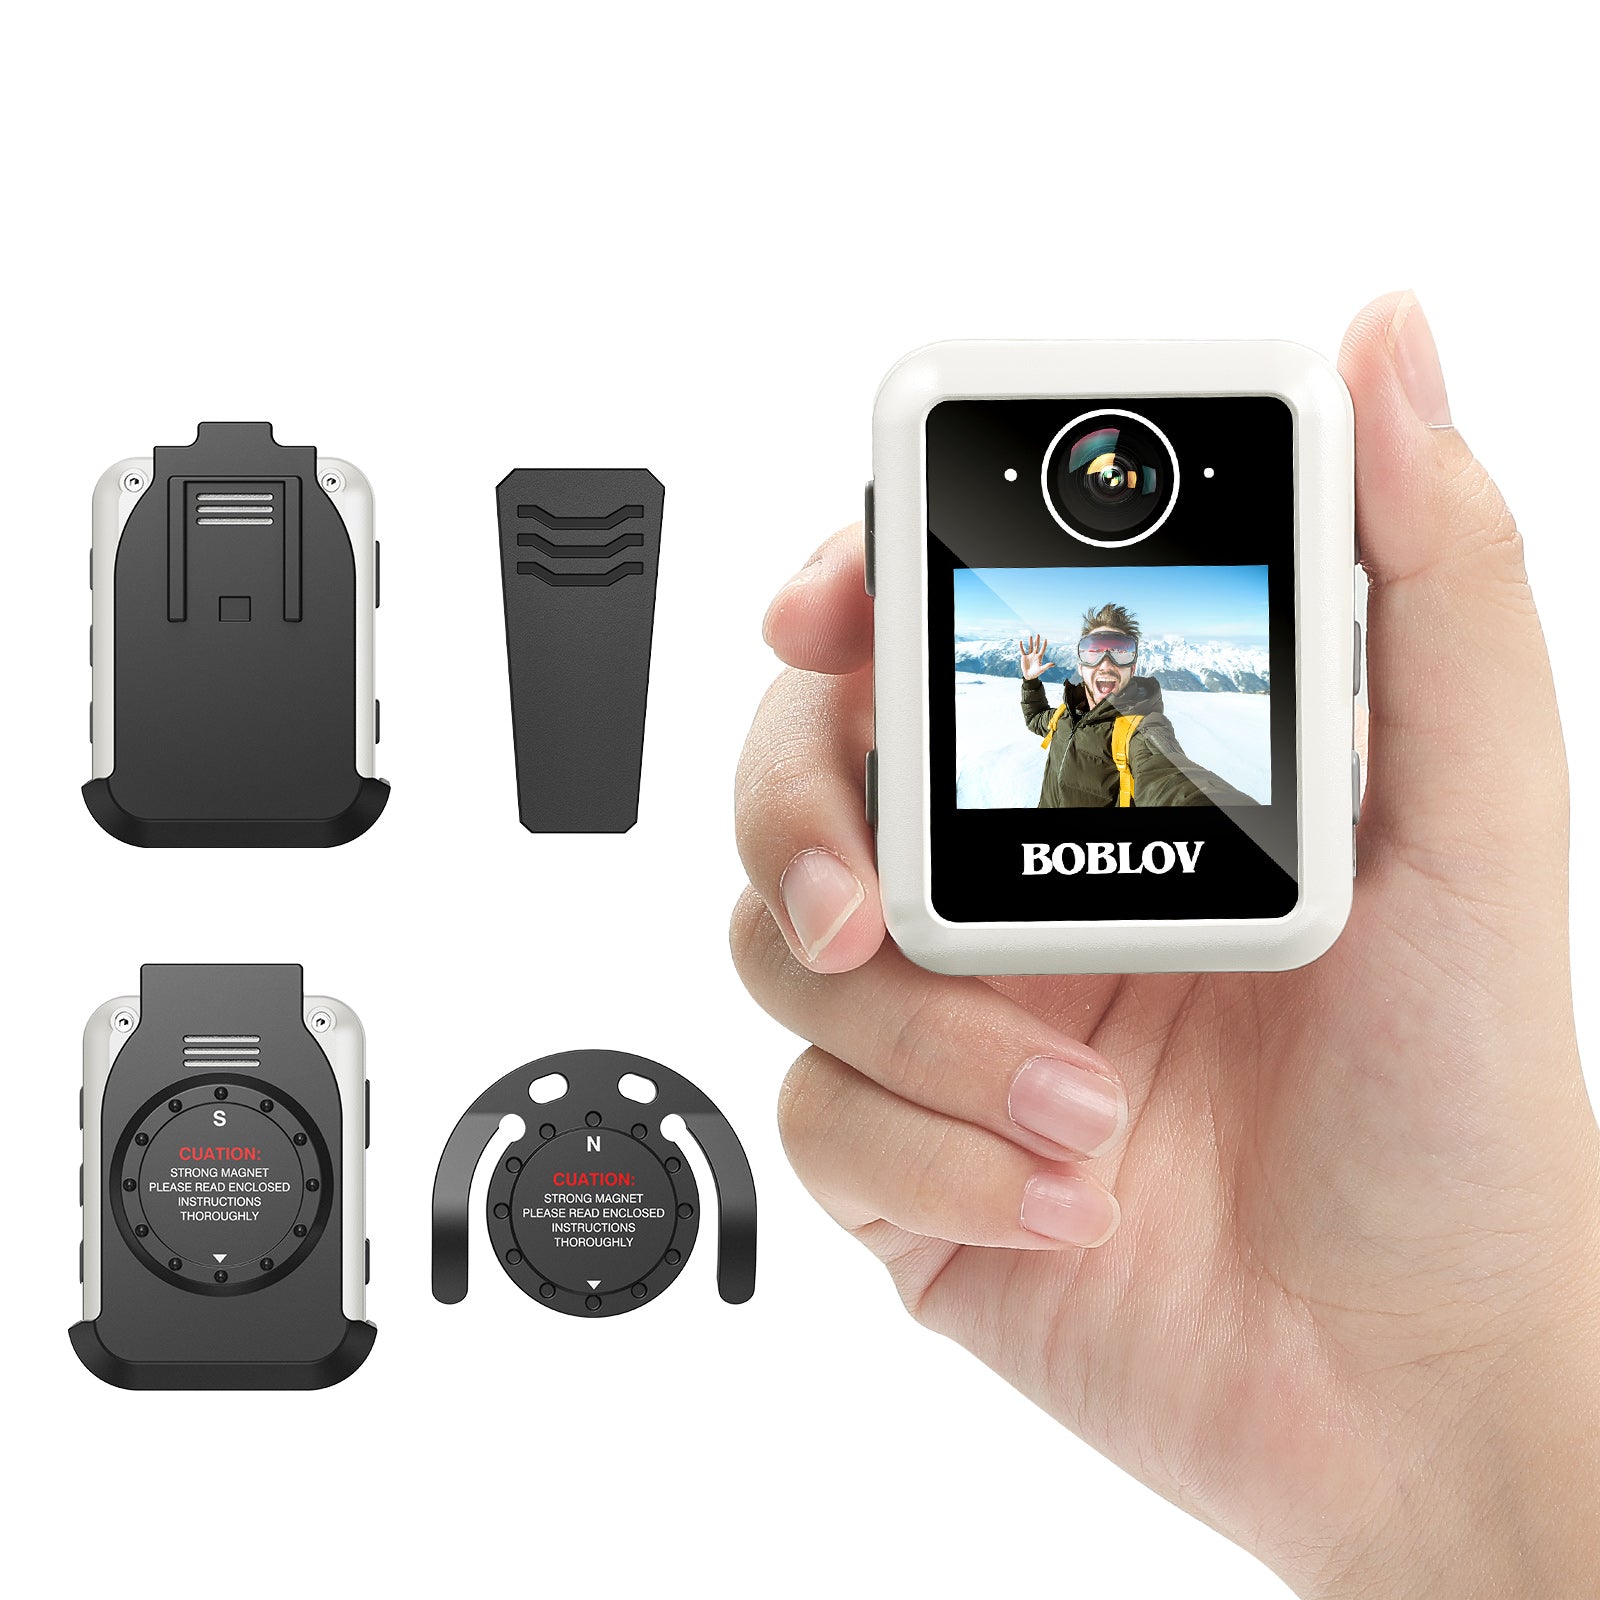 BOBLOV X2 Body Camera with 1440P resolution and LCD Display6